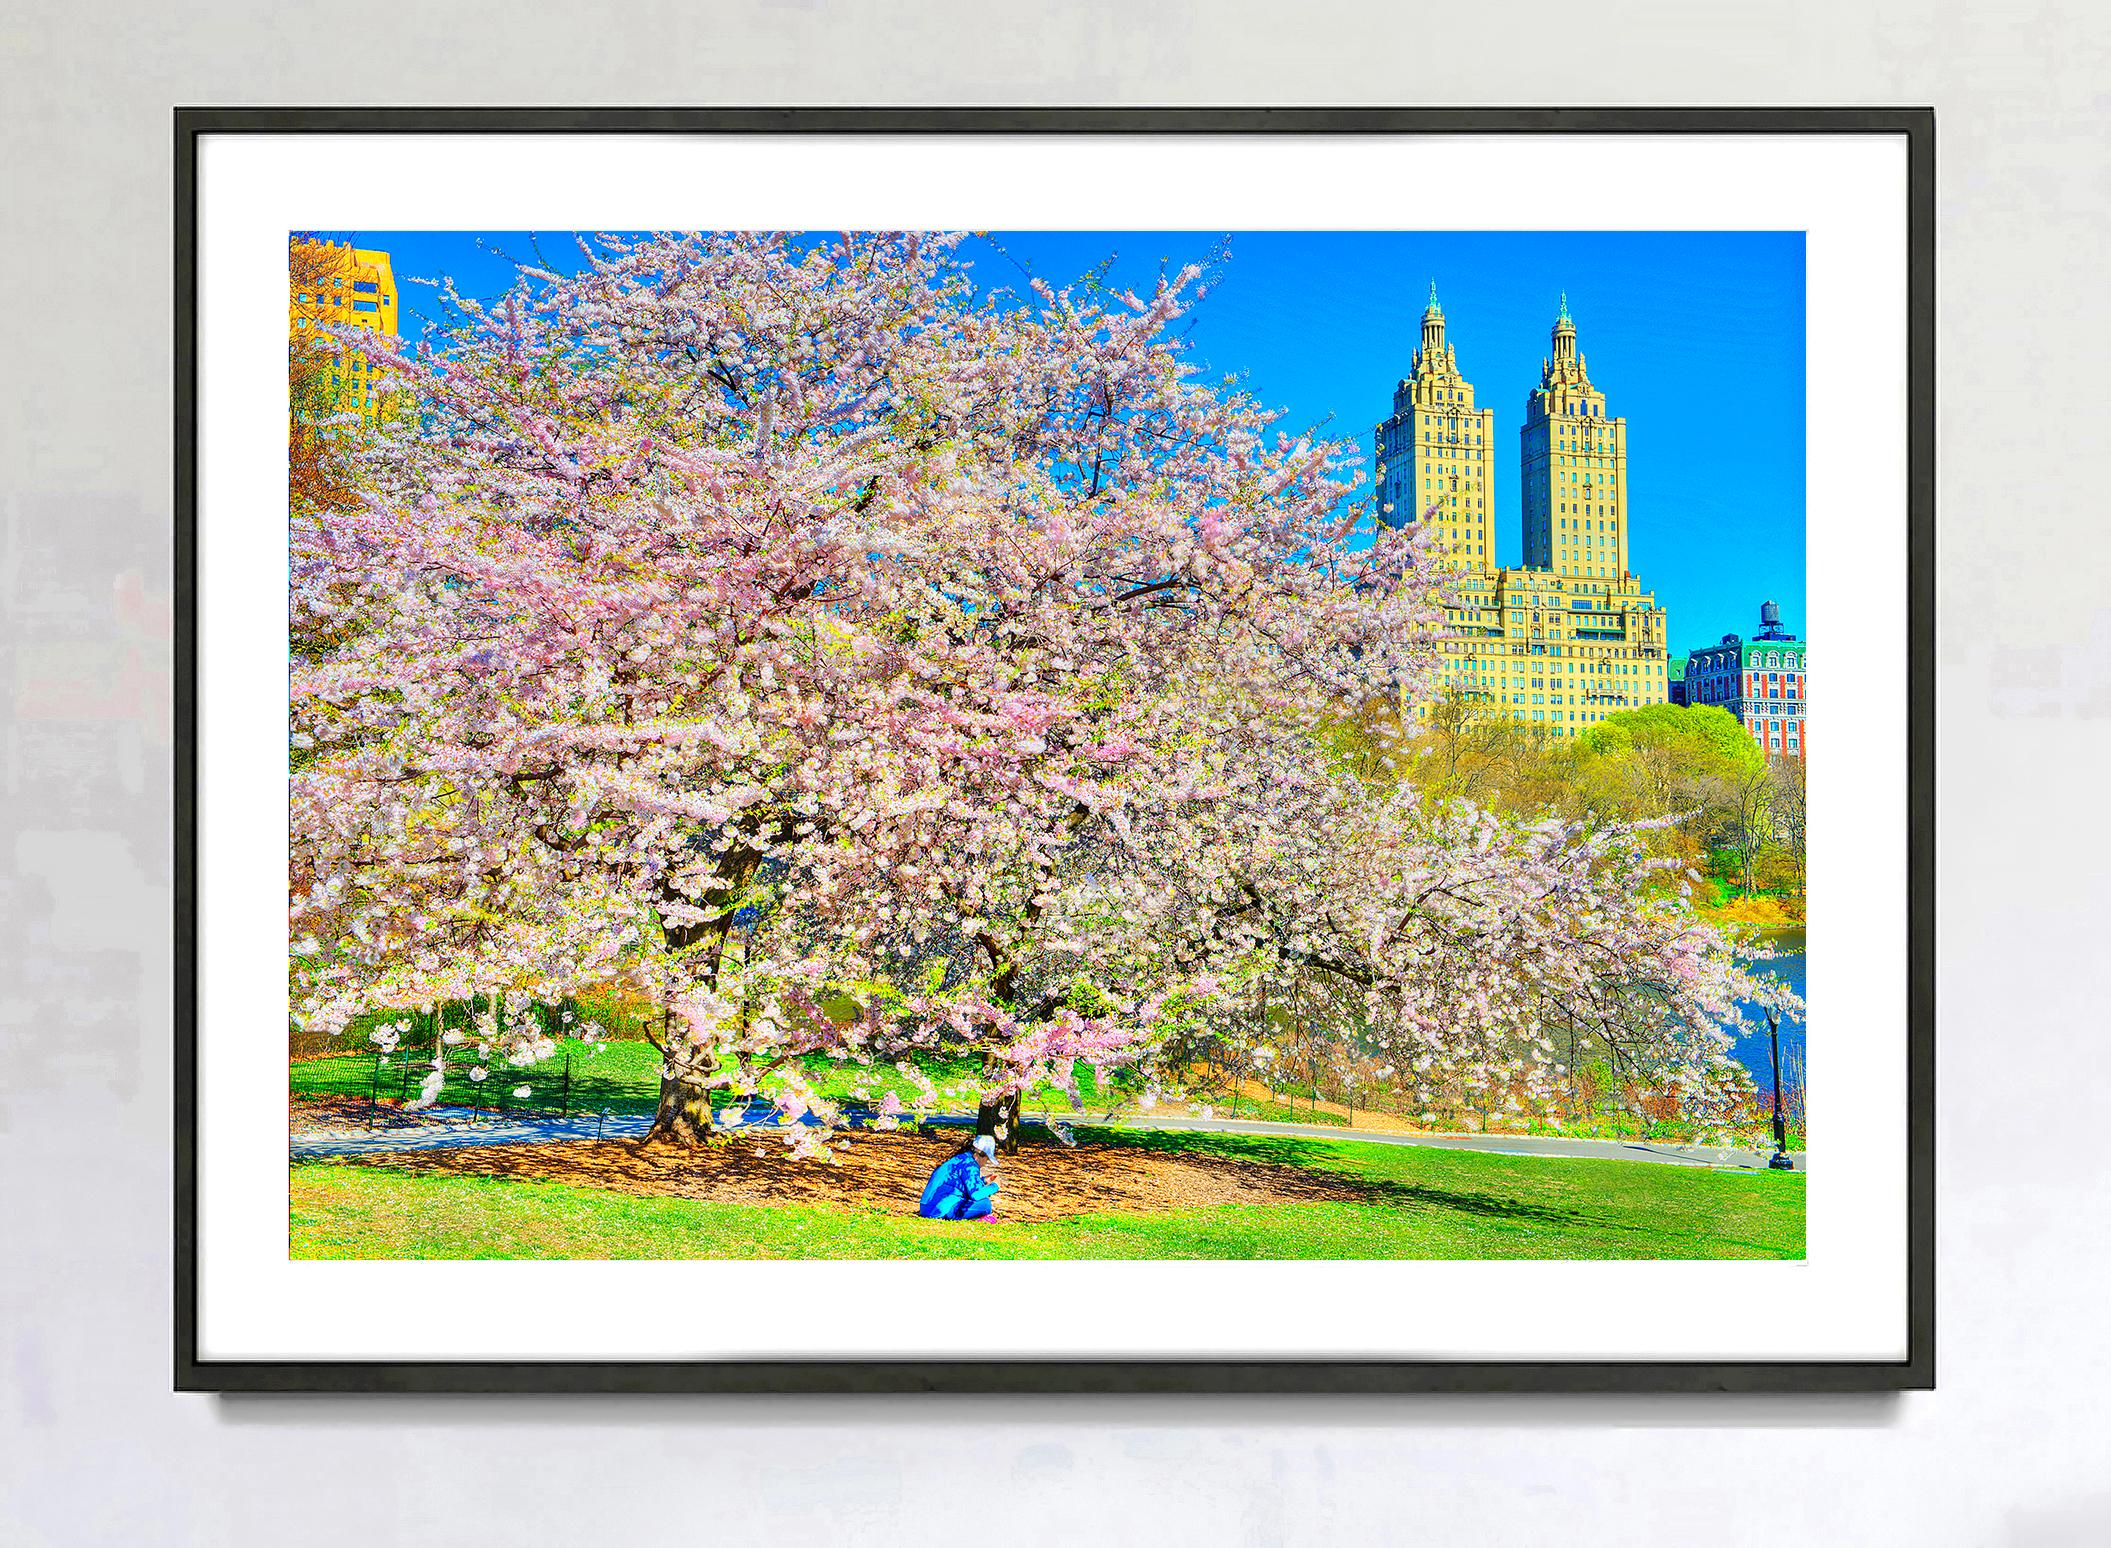 Cherry Blossoms  in Bloom, Urban Garden of Central Park  with The San Remo  - Photograph by Mitchell Funk